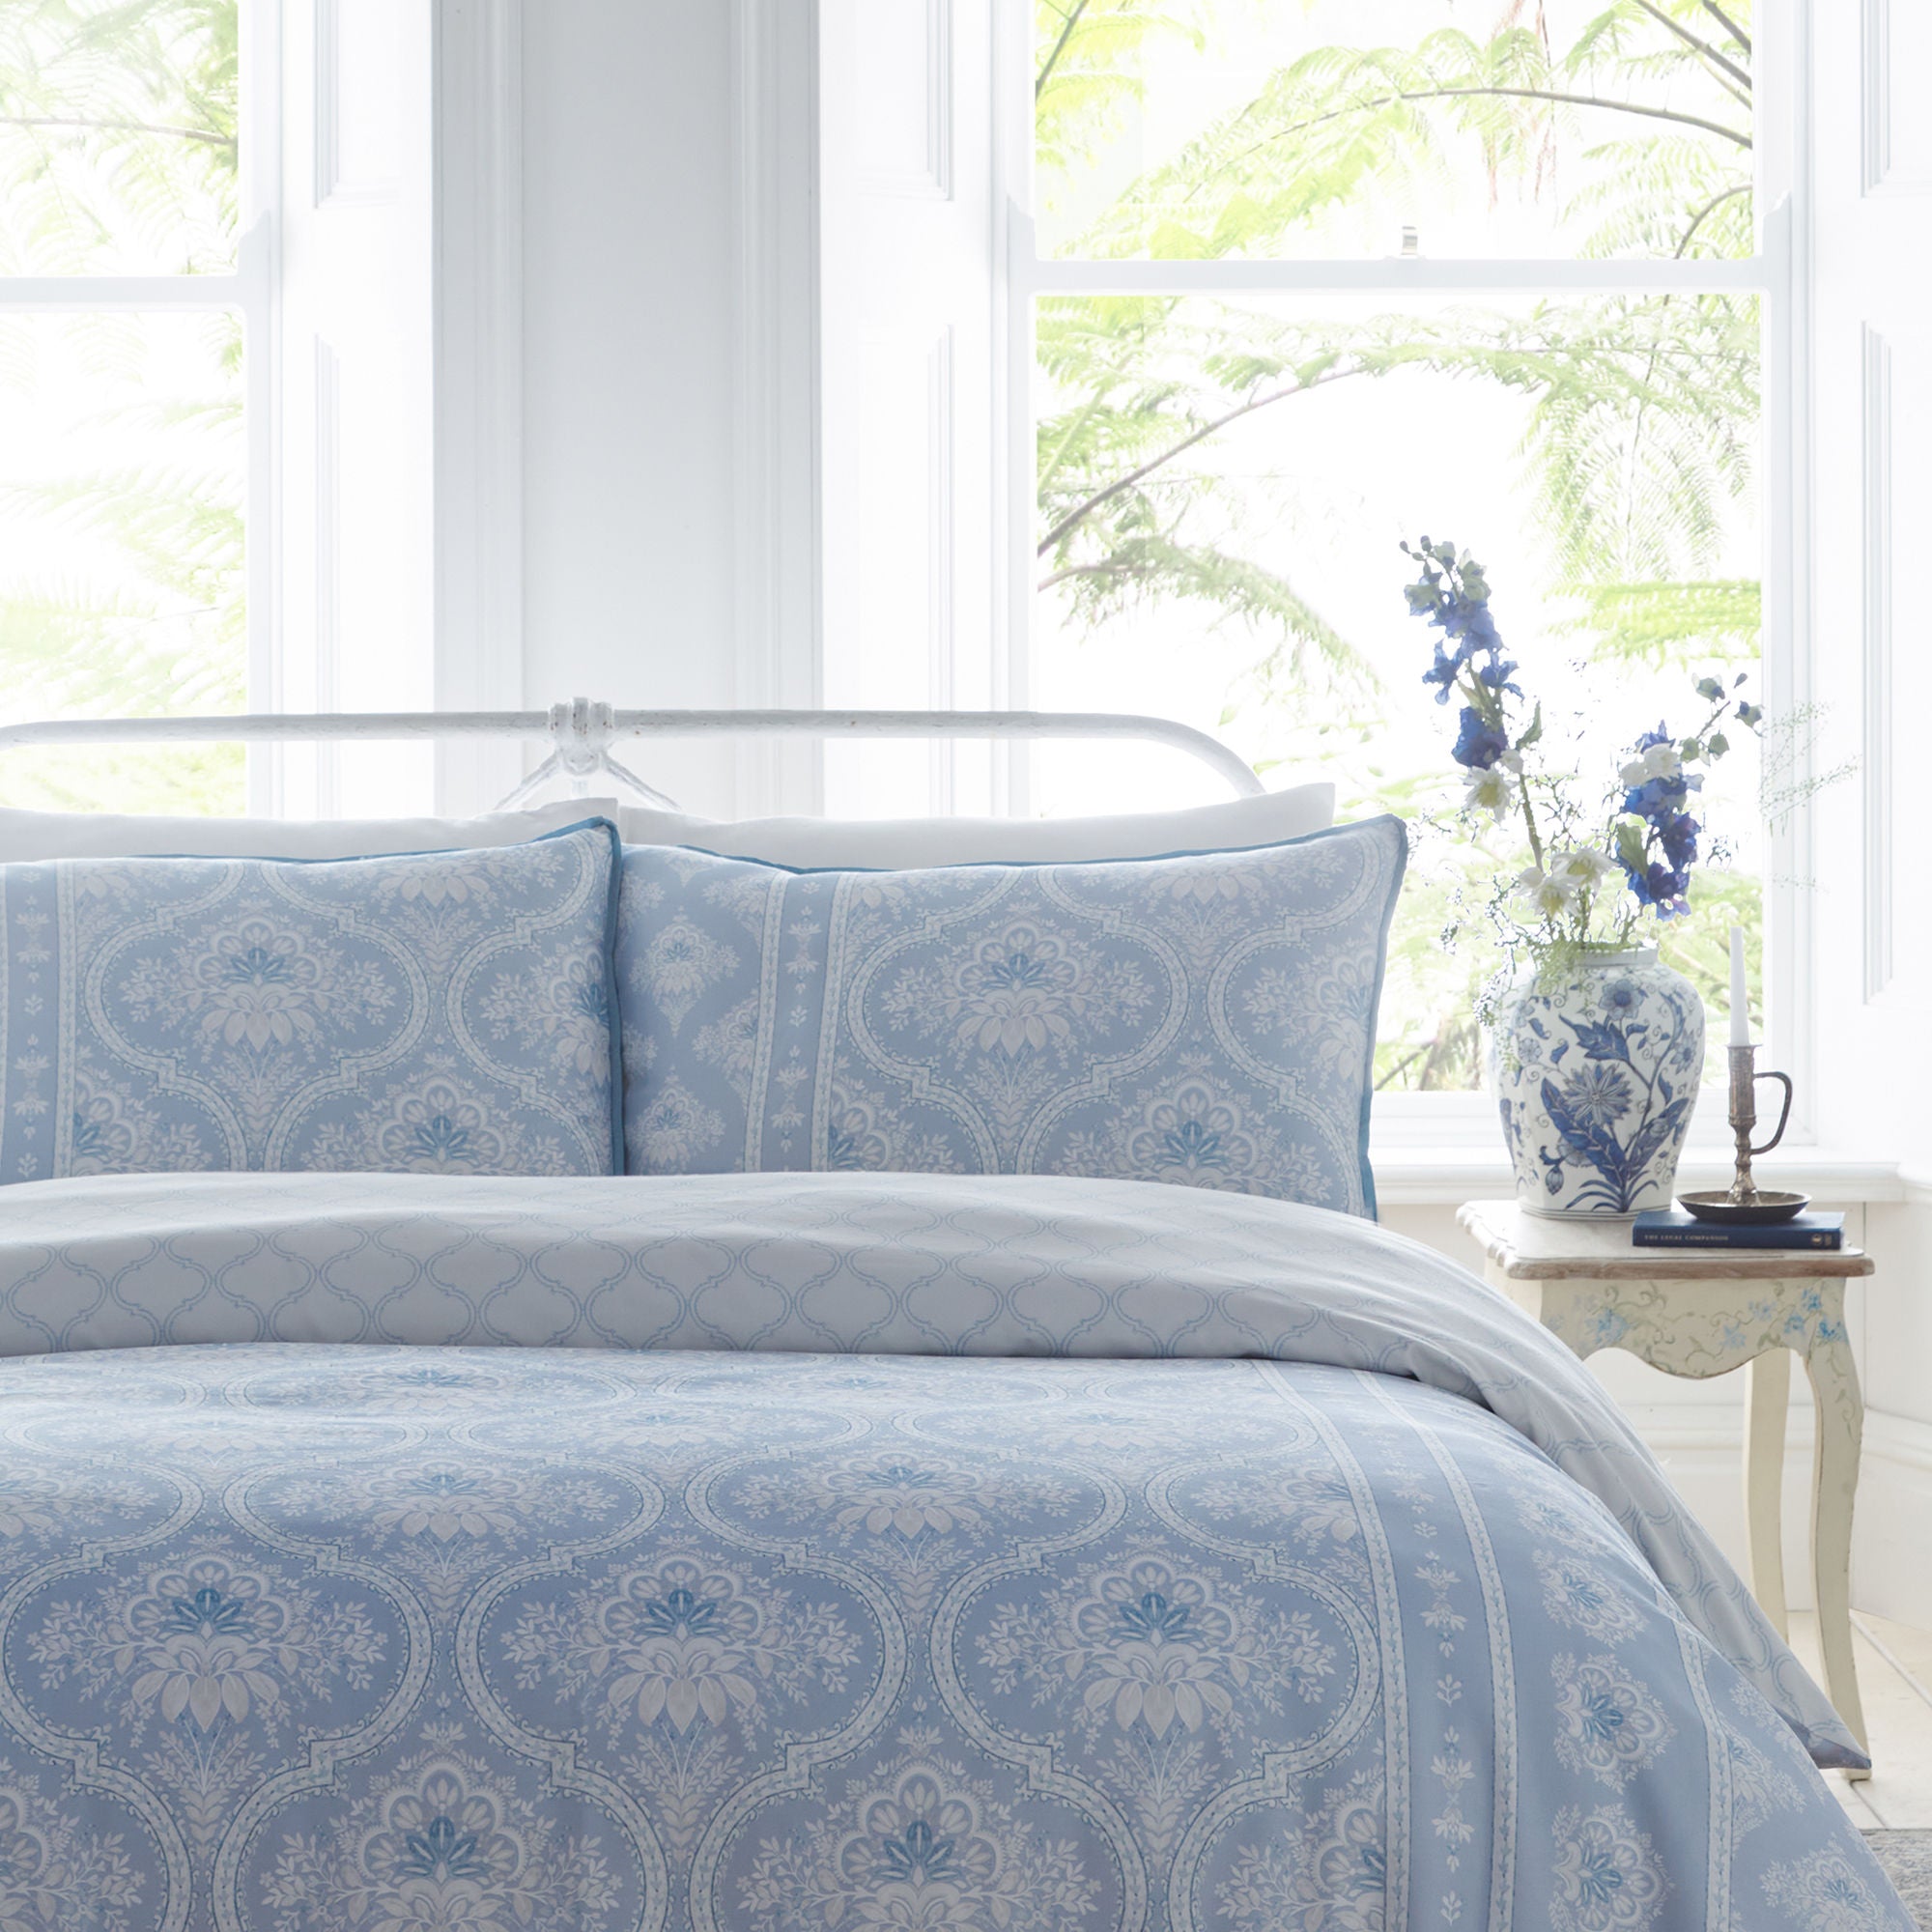 Alexia Duvet Cover Set by Appletree Heritage in Blue - Duvet Cover Set - Appletree Heritage